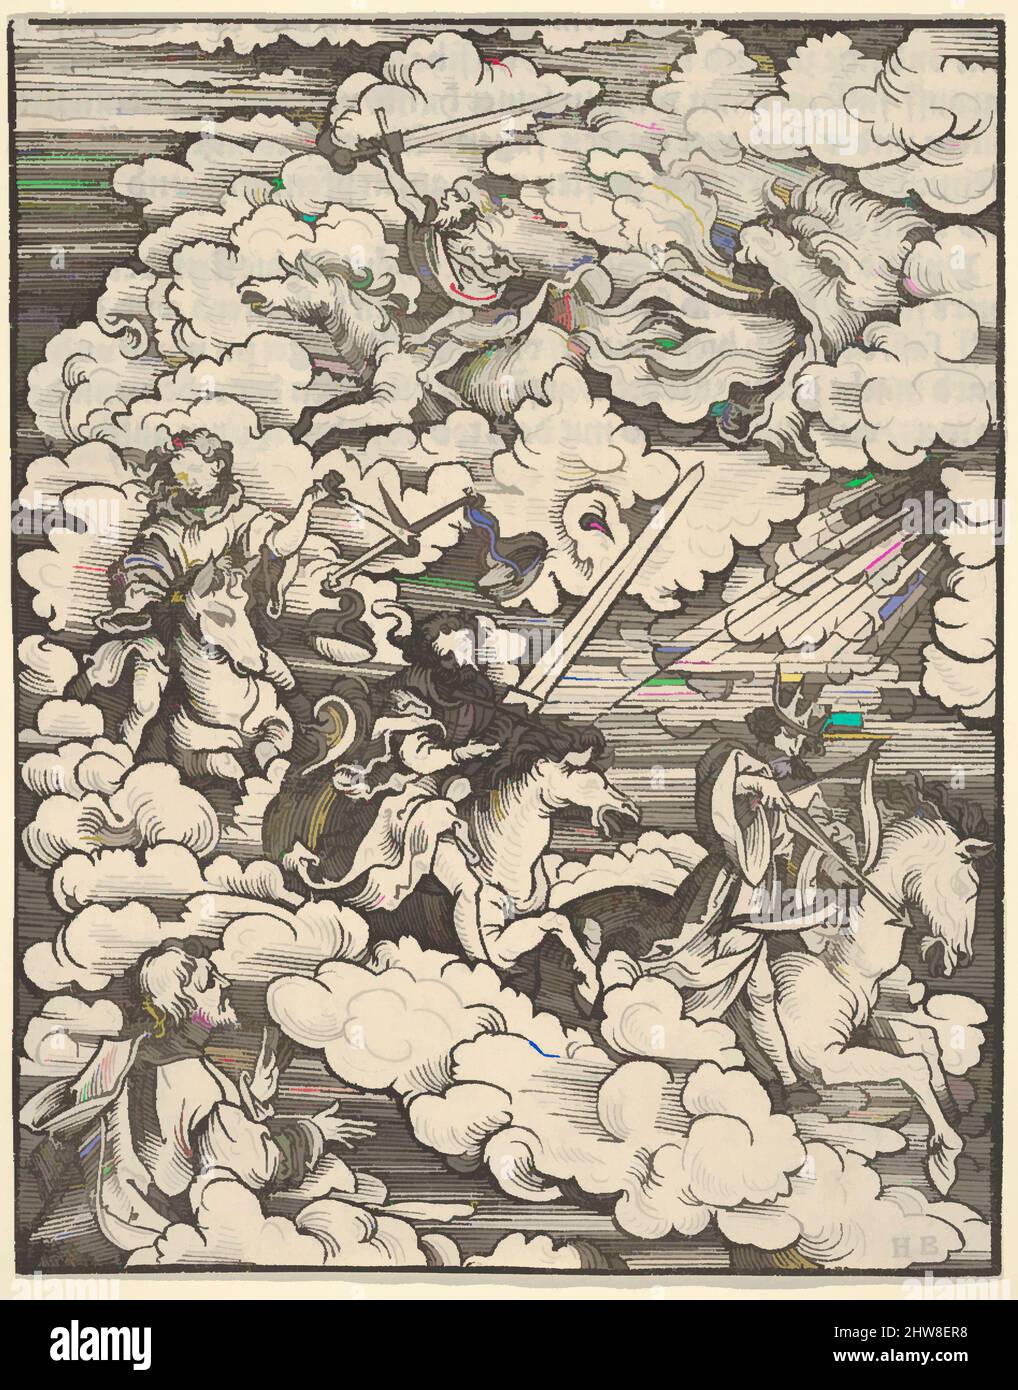 Art inspired by The Apocalyptic Riders, from The Apocalypse, 1523–24, Woodcut, Sheet: 6 7/16 × 5 1/16 in. (16.3 × 12.9 cm), Prints, Hans Burgkmair (German, Augsburg 1473–1531 Augsburg), Plate 3 from a series of 21 woodcuts with scenes from the Apocalypse for Martin Luther's translation, Classic works modernized by Artotop with a splash of modernity. Shapes, color and value, eye-catching visual impact on art. Emotions through freedom of artworks in a contemporary way. A timeless message pursuing a wildly creative new direction. Artists turning to the digital medium and creating the Artotop NFT Stock Photo